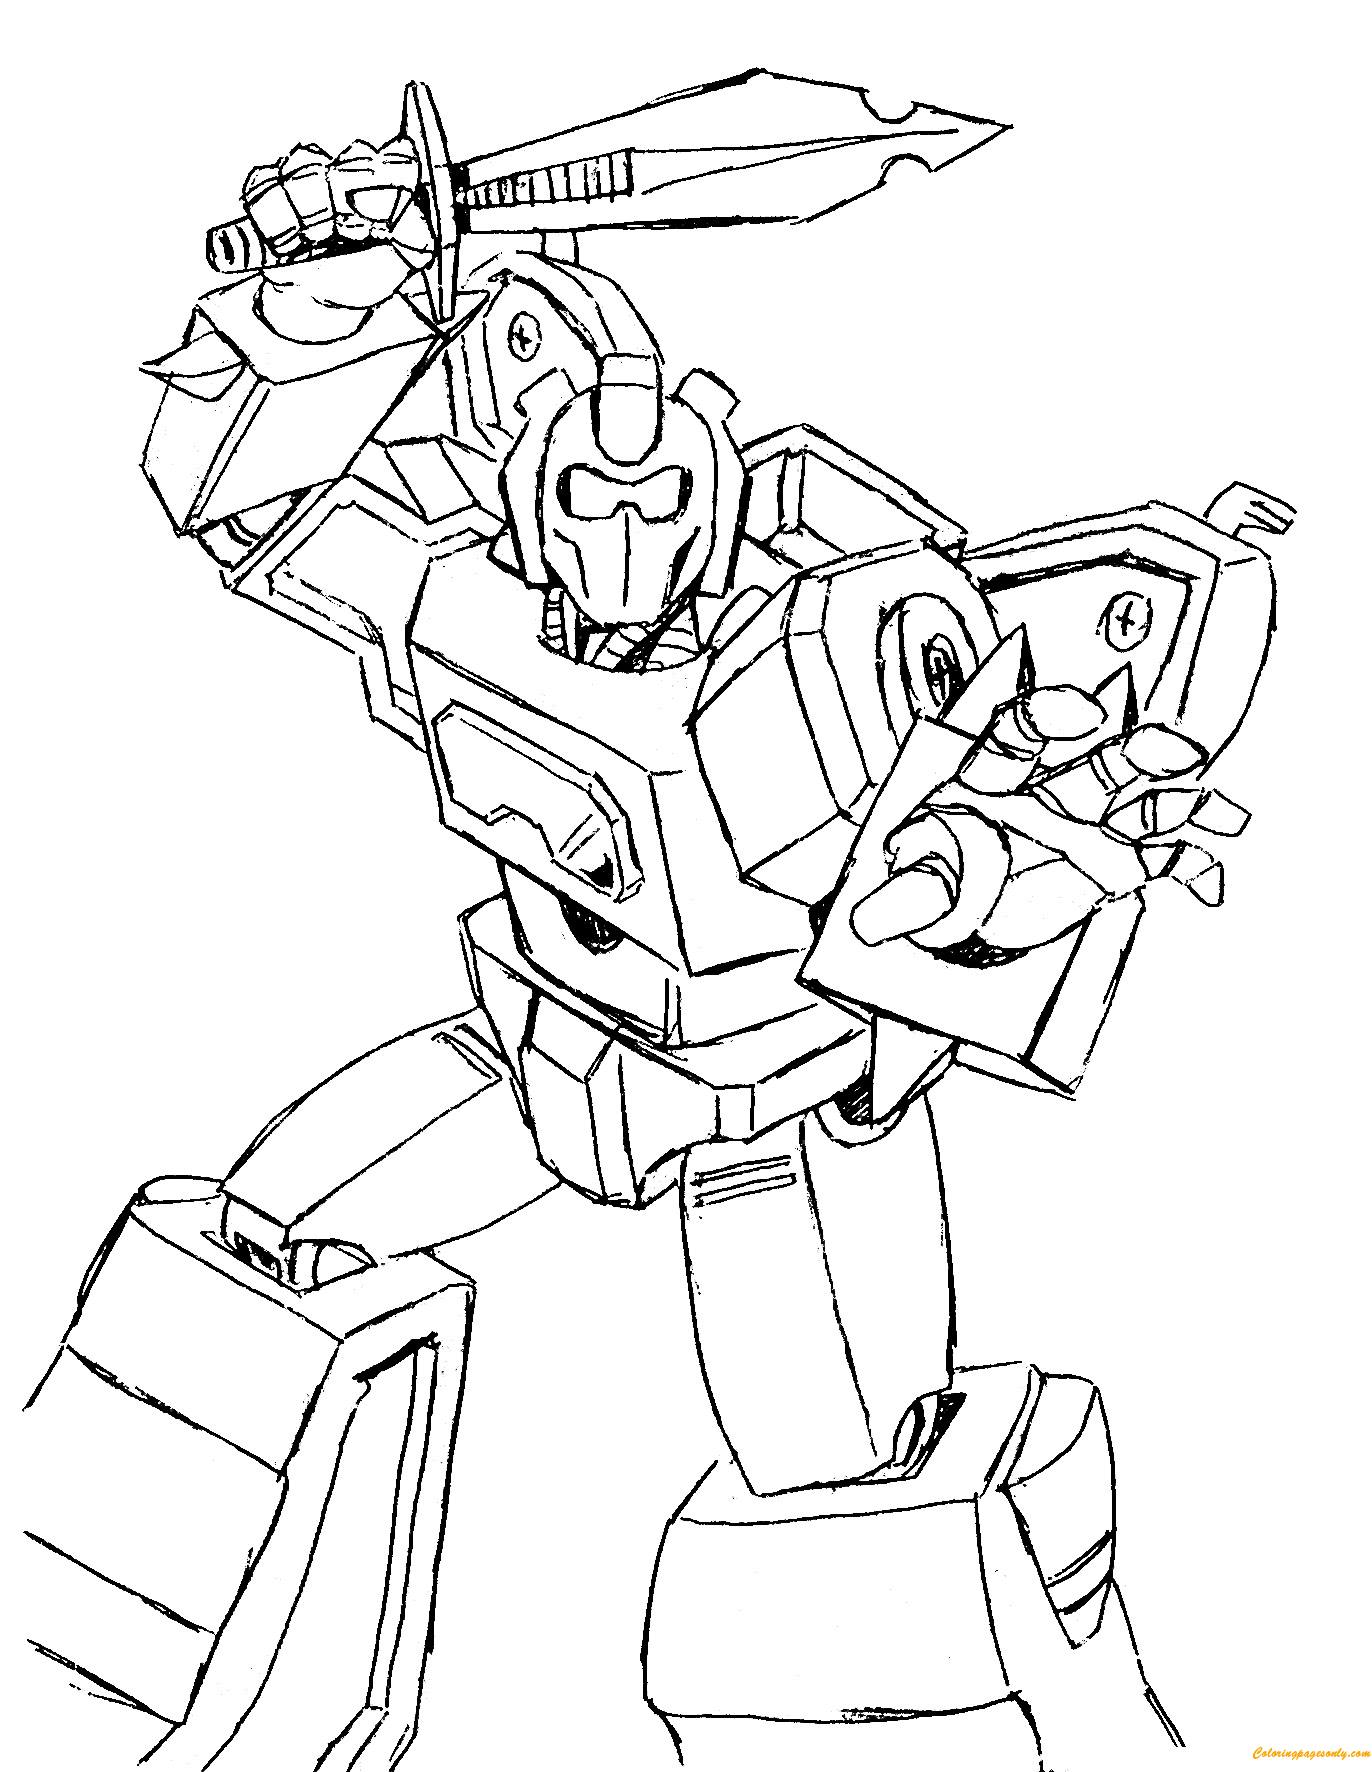 Transformers 3 Fighting Coloring Page - Free Coloring ...